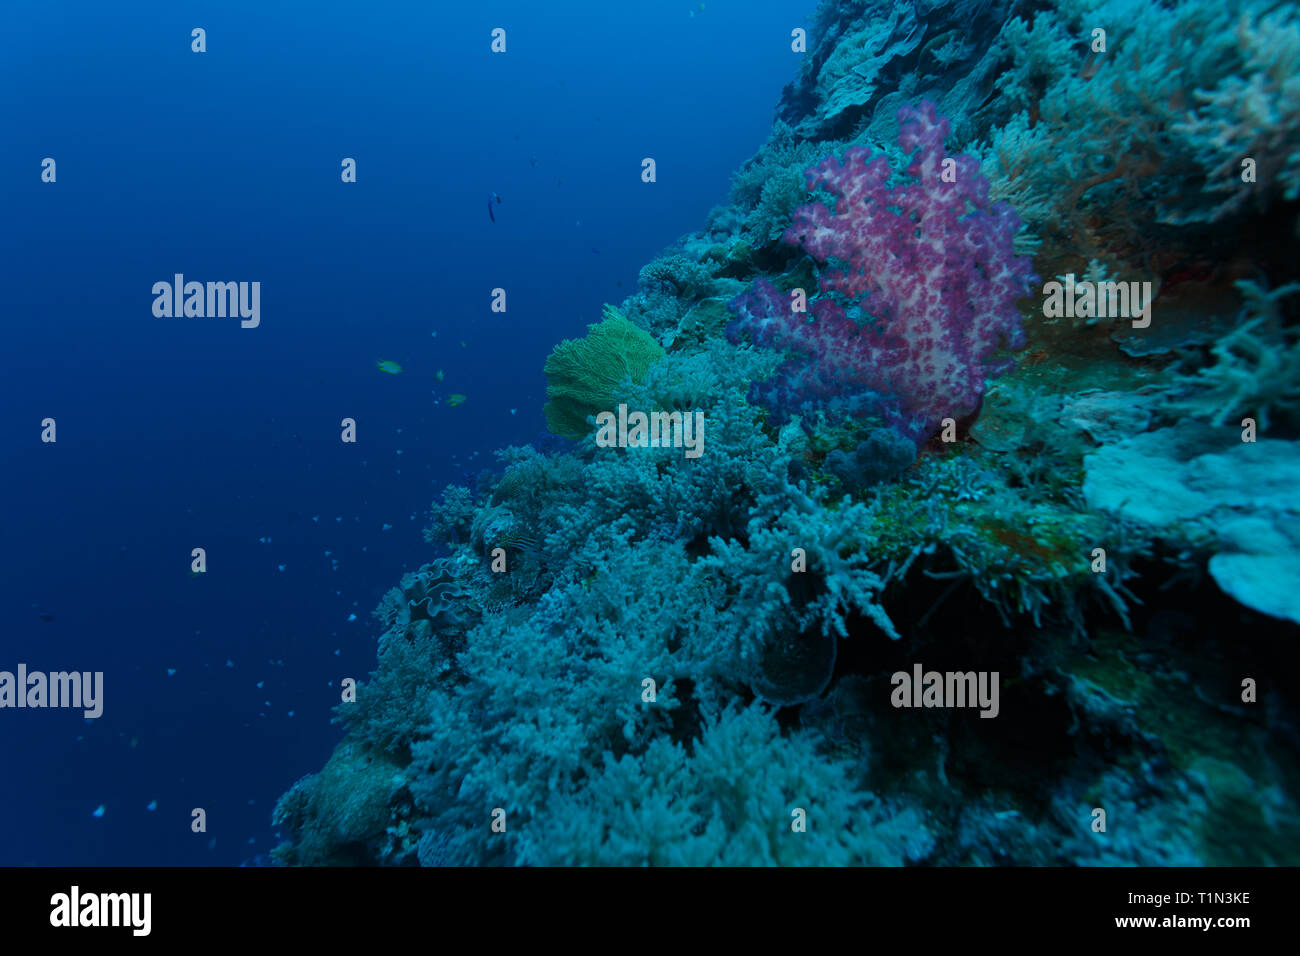 Reef outcrop with  alcyonacean showing individual polyps, plate, staghorn and  sea fan corals Stock Photo